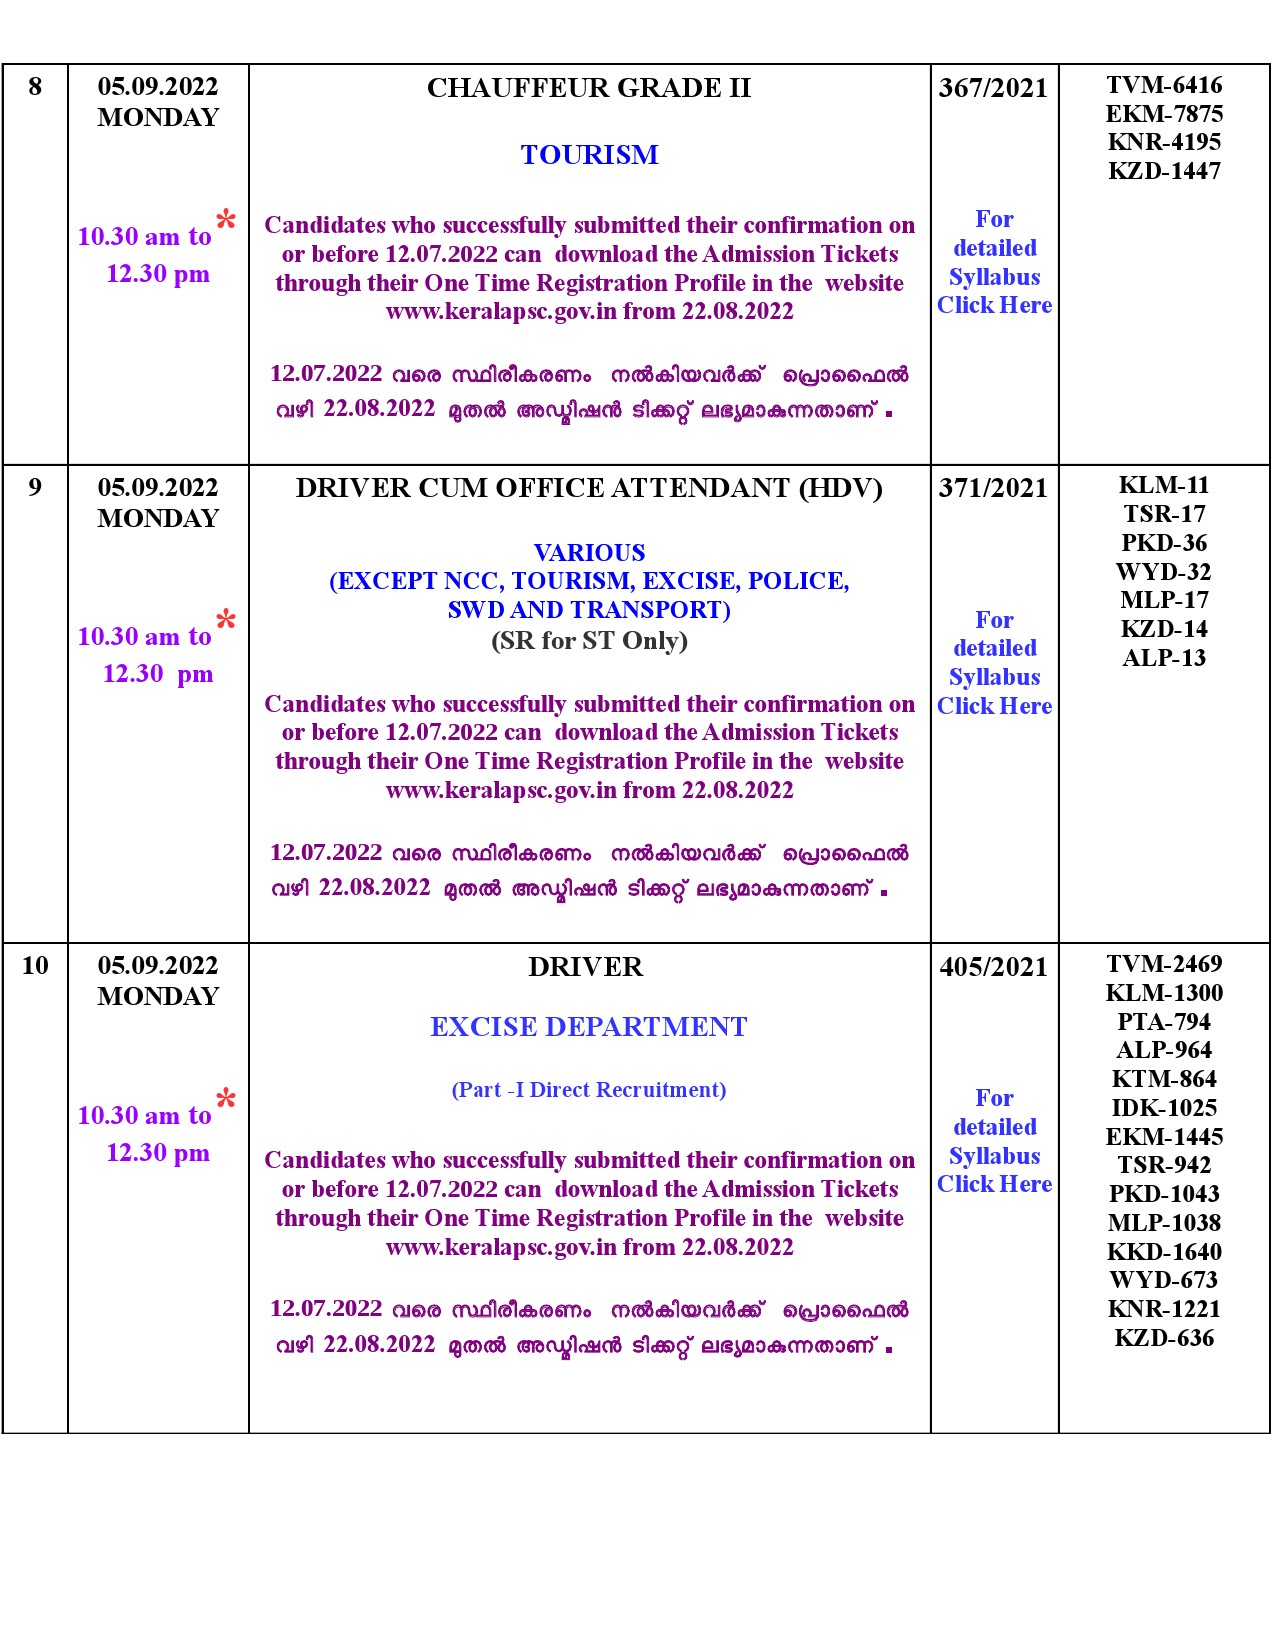 Examination Programme For The Month Of September 2022 - Notification Image 5